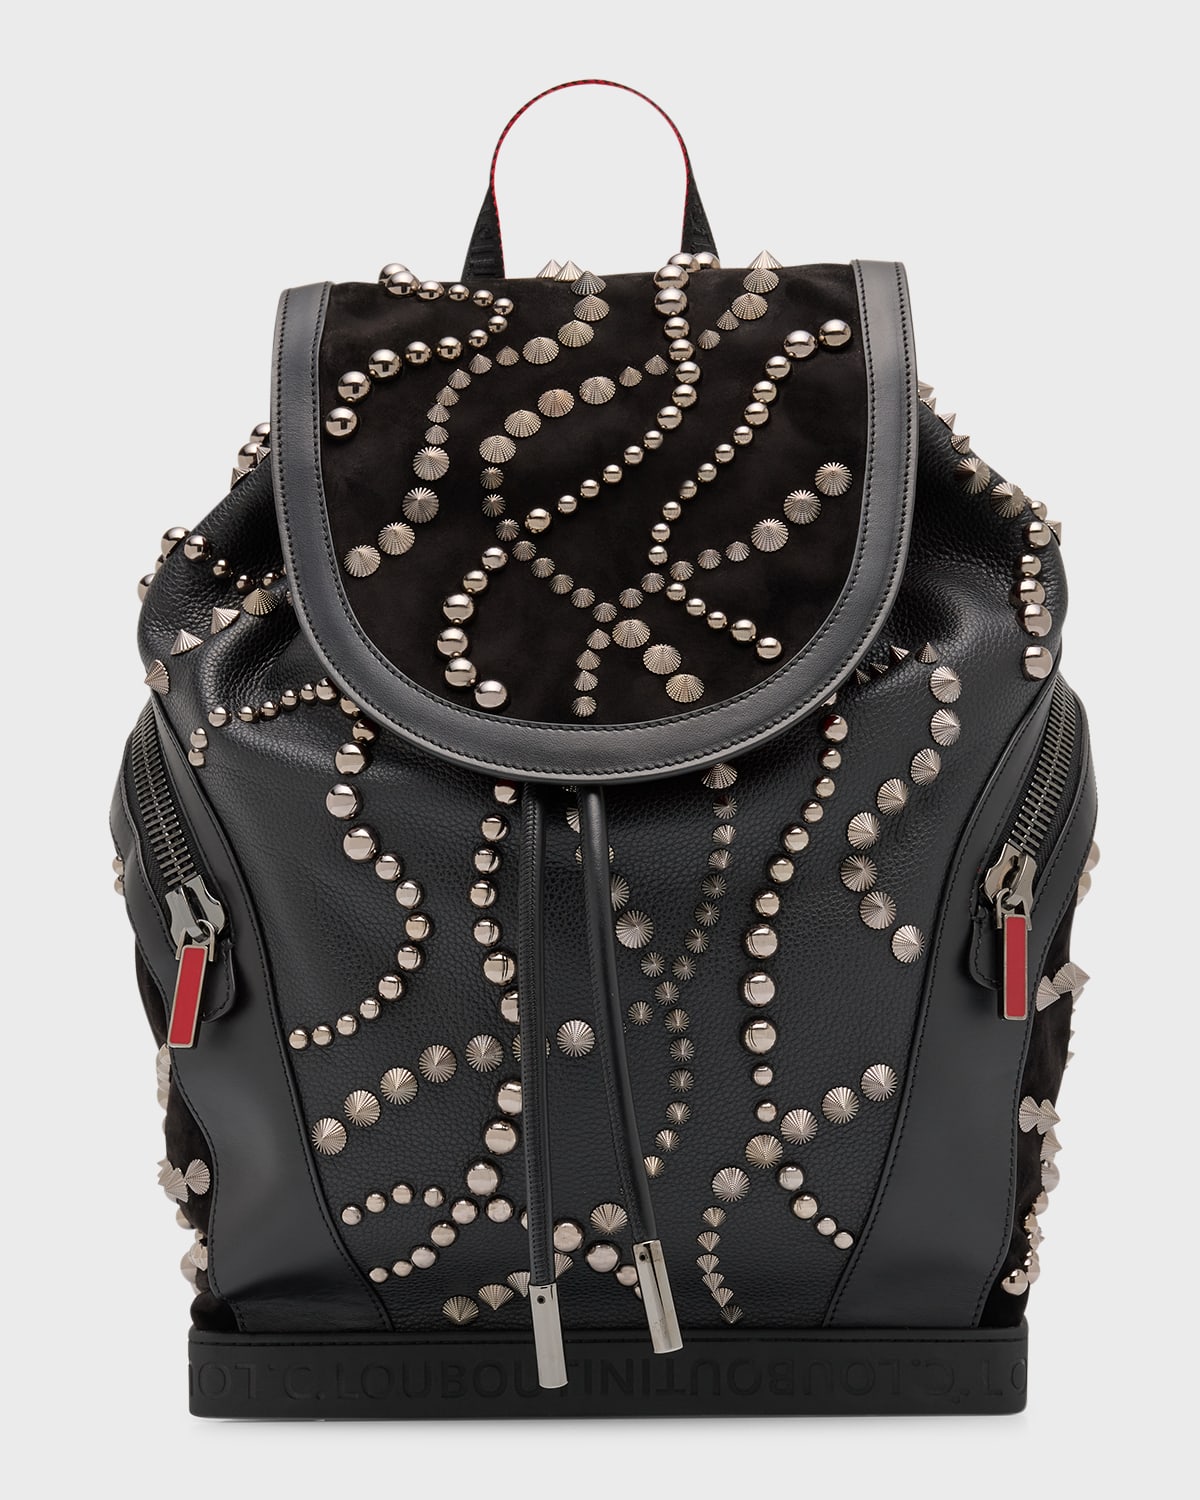 Christian Louboutin Men's Spiked Red Sole Leather Backpack | Neiman Marcus